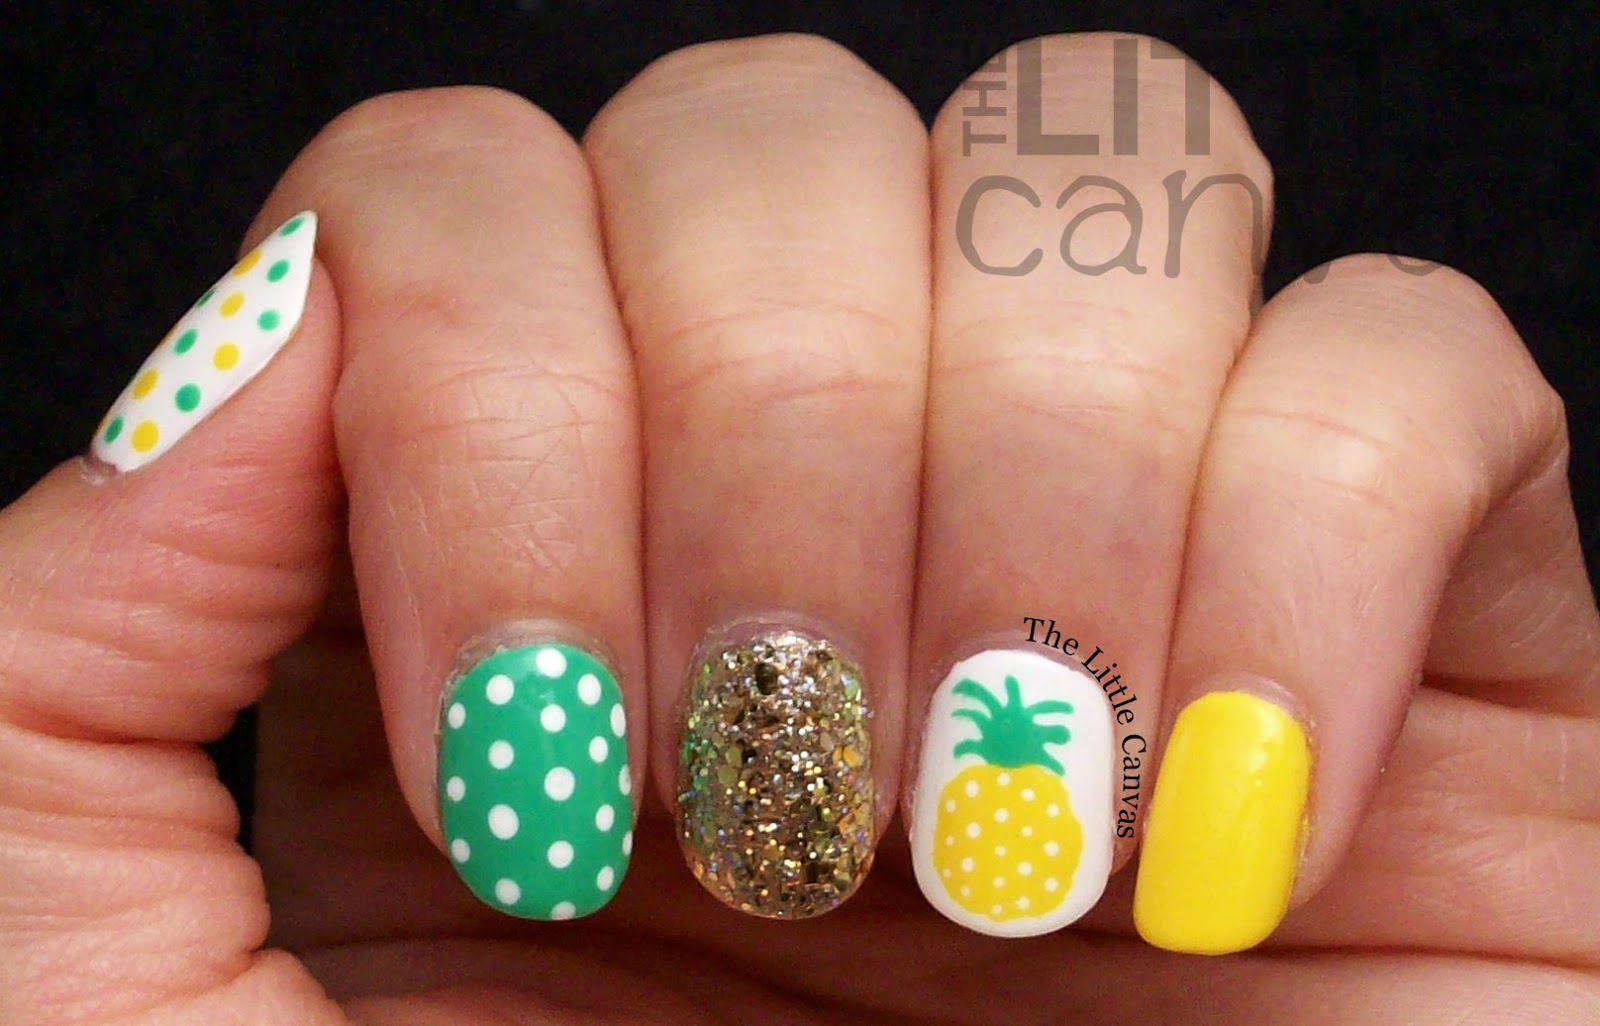 2. Cute Pineapple Nail Designs for Toes - wide 4